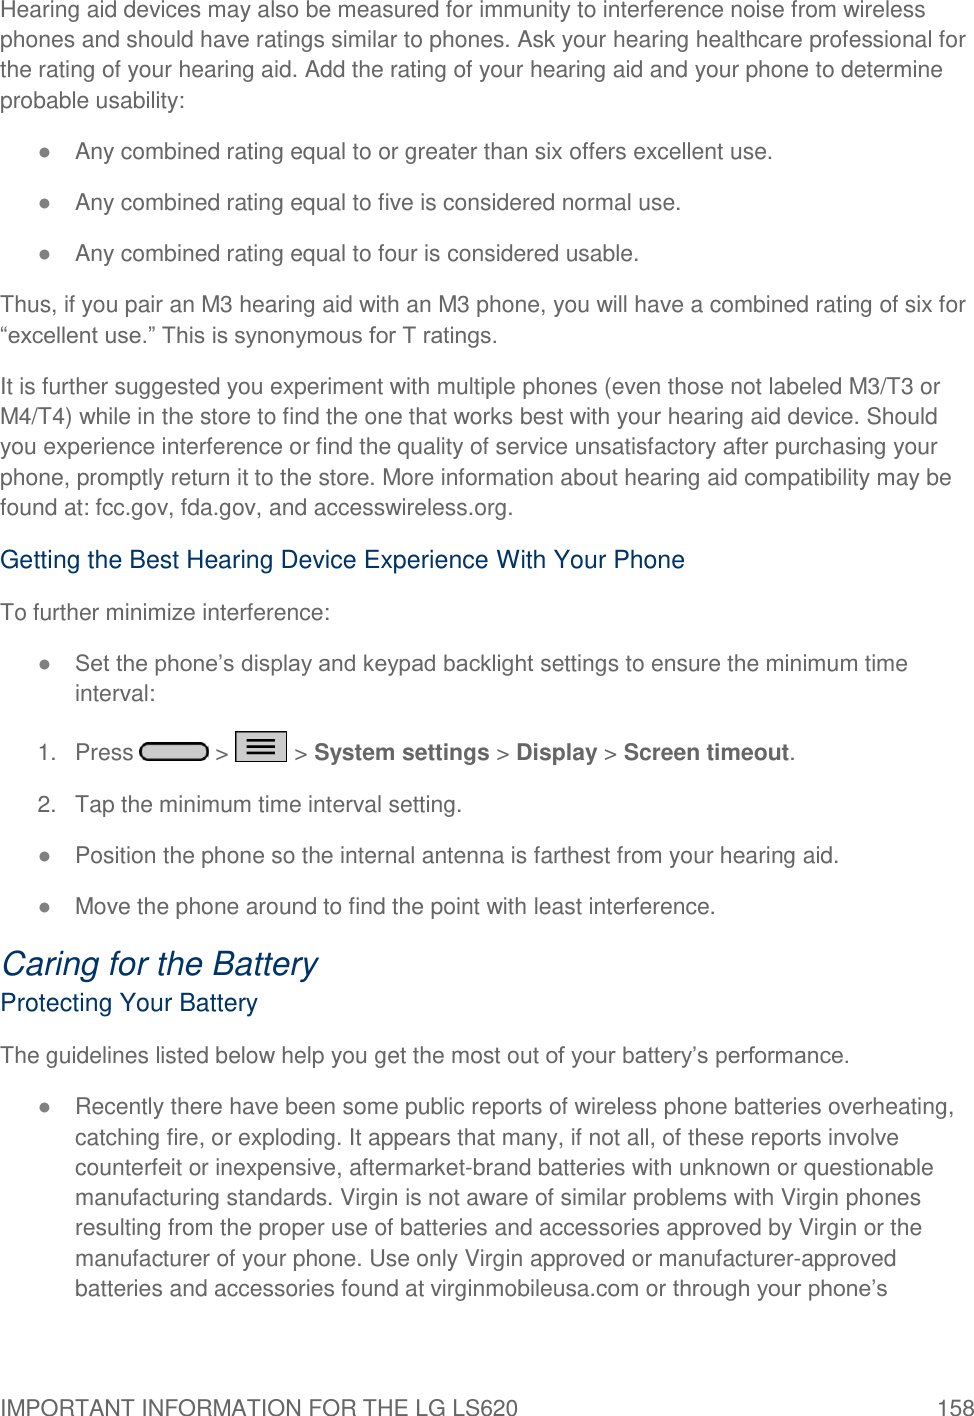 IMPORTANT INFORMATION FOR THE LG LS620  158 Hearing aid devices may also be measured for immunity to interference noise from wireless phones and should have ratings similar to phones. Ask your hearing healthcare professional for the rating of your hearing aid. Add the rating of your hearing aid and your phone to determine probable usability: ● Any combined rating equal to or greater than six offers excellent use. ● Any combined rating equal to five is considered normal use. ● Any combined rating equal to four is considered usable. Thus, if you pair an M3 hearing aid with an M3 phone, you will have a combined rating of six for ―excellent use.‖ This is synonymous for T ratings. It is further suggested you experiment with multiple phones (even those not labeled M3/T3 or M4/T4) while in the store to find the one that works best with your hearing aid device. Should you experience interference or find the quality of service unsatisfactory after purchasing your phone, promptly return it to the store. More information about hearing aid compatibility may be found at: fcc.gov, fda.gov, and accesswireless.org. Getting the Best Hearing Device Experience With Your Phone To further minimize interference: ● Set the phone‘s display and keypad backlight settings to ensure the minimum time interval: 1.  Press   &gt;   &gt; System settings &gt; Display &gt; Screen timeout. 2.  Tap the minimum time interval setting. ● Position the phone so the internal antenna is farthest from your hearing aid. ● Move the phone around to find the point with least interference. Caring for the Battery Protecting Your Battery The guidelines listed below help you get the most out of your battery‘s performance. ● Recently there have been some public reports of wireless phone batteries overheating, catching fire, or exploding. It appears that many, if not all, of these reports involve counterfeit or inexpensive, aftermarket-brand batteries with unknown or questionable manufacturing standards. Virgin is not aware of similar problems with Virgin phones resulting from the proper use of batteries and accessories approved by Virgin or the manufacturer of your phone. Use only Virgin approved or manufacturer-approved batteries and accessories found at virginmobileusa.com or through your phone‘s 